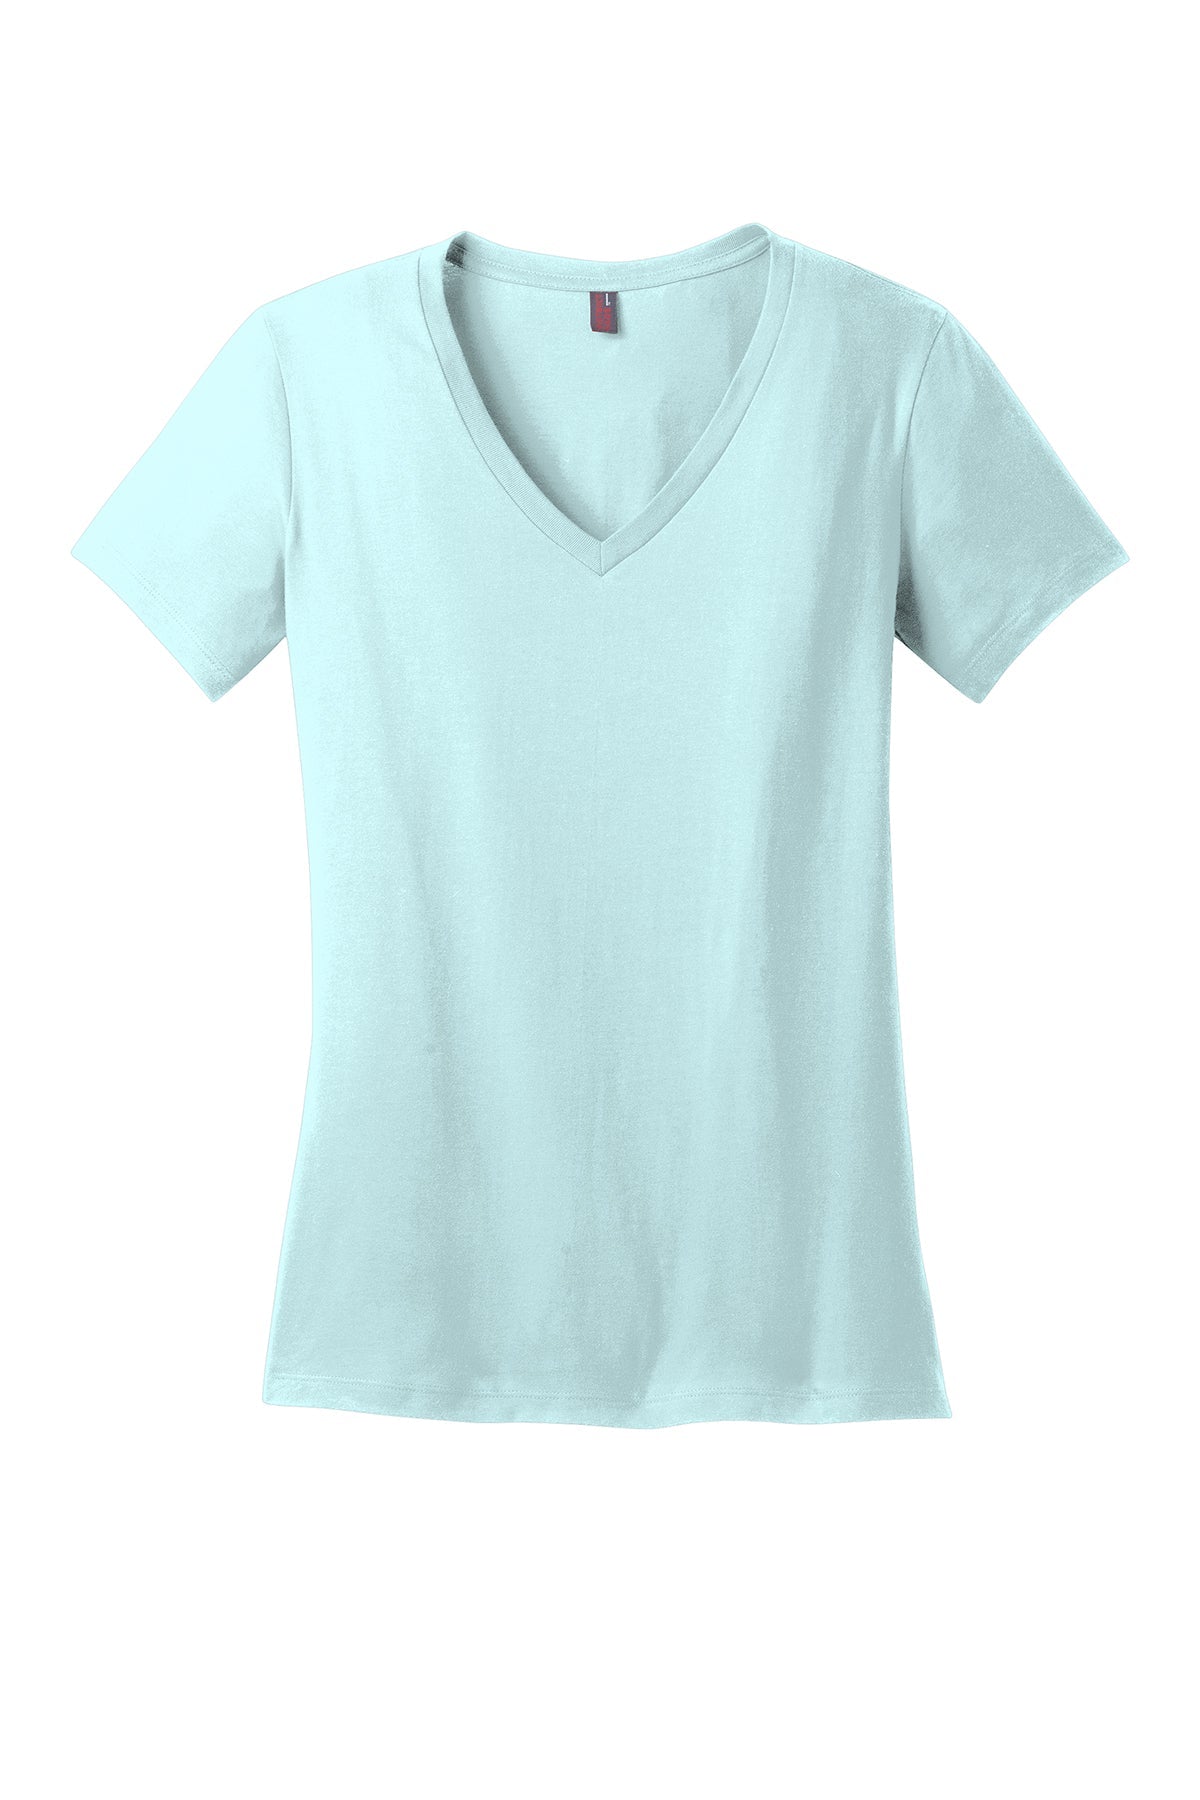 DM1170L District ® Women’s Perfect Weight ® V-Neck Tee. XS-4XL